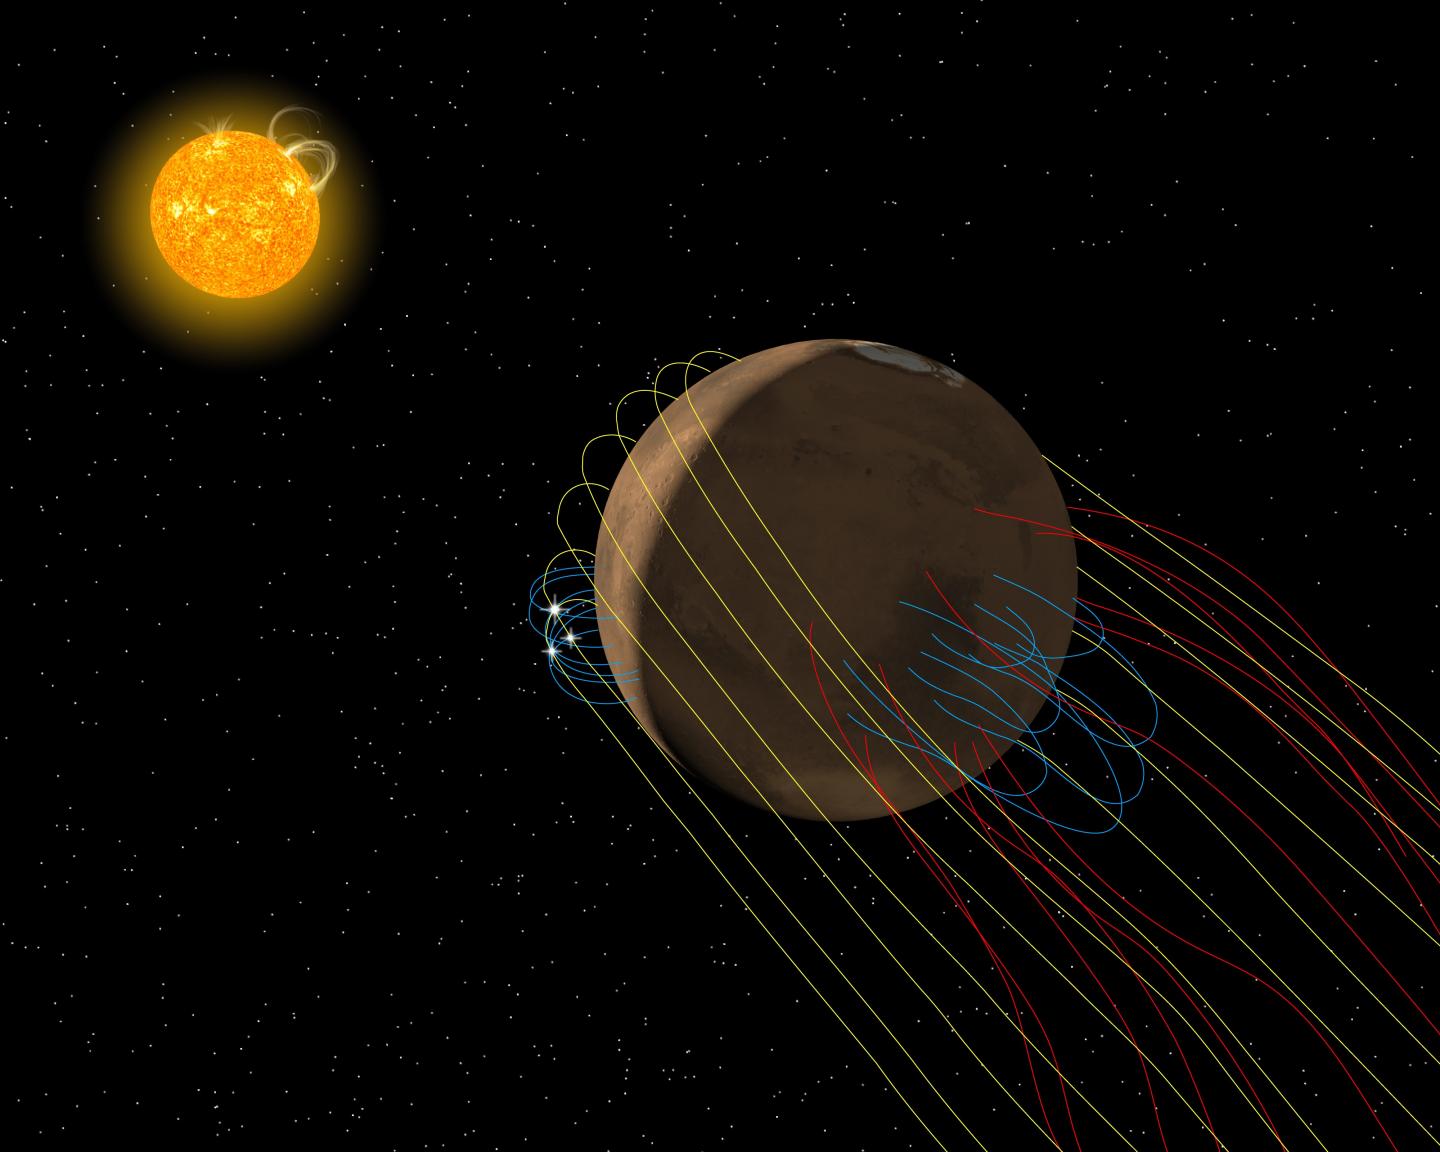 Illustration of Mars' Complex Magnetic Field Environment